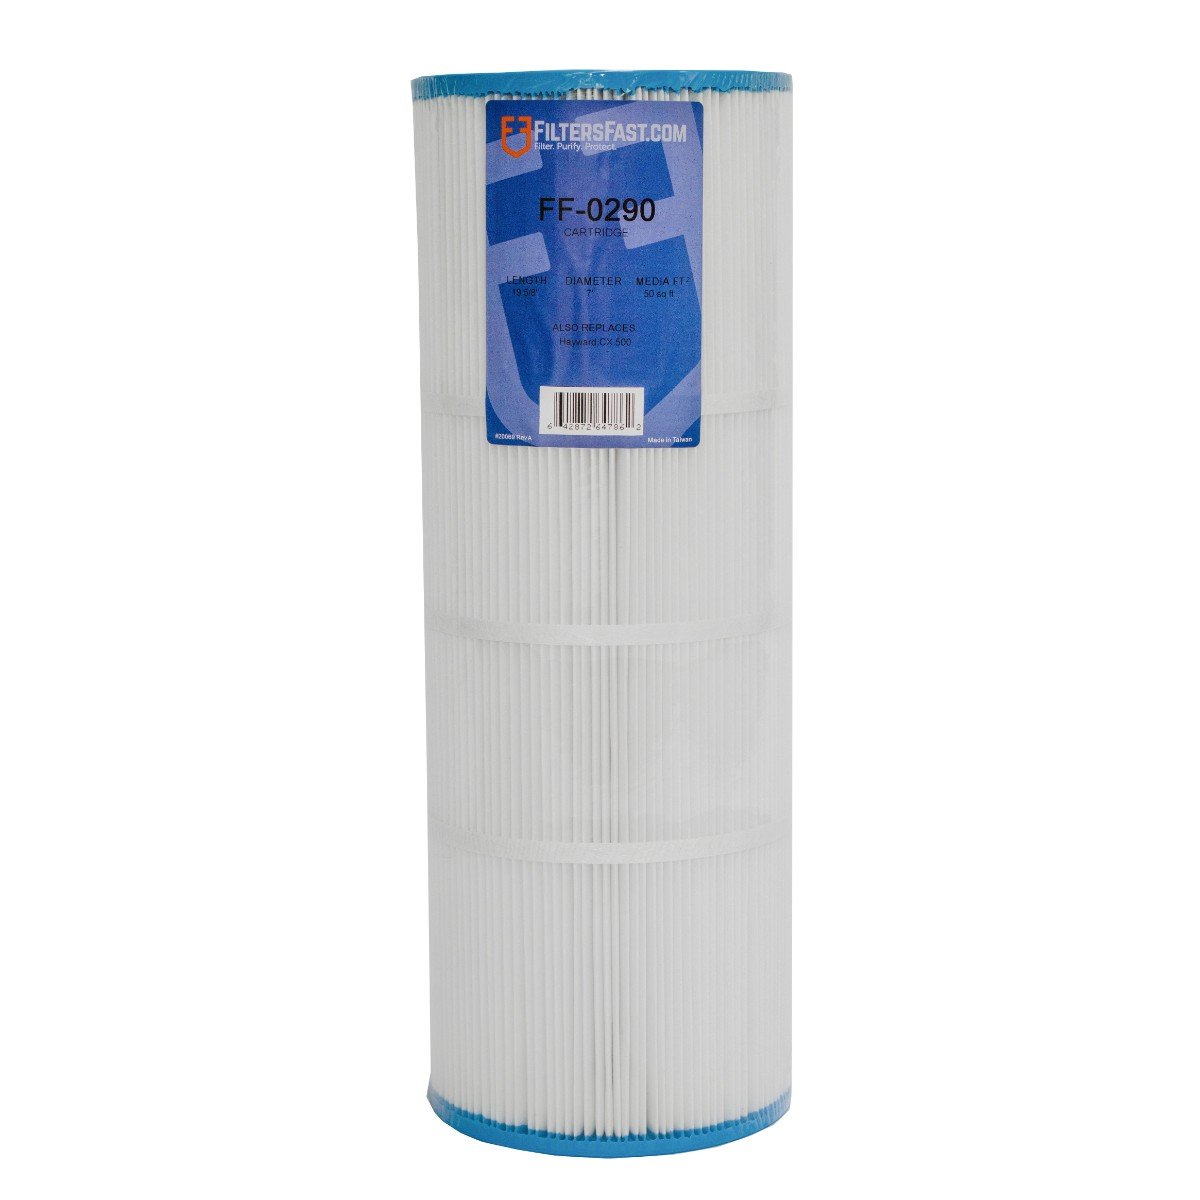 Filters Fast&reg; FF-0290 Replacement Pool & Spa Filter Cartridge